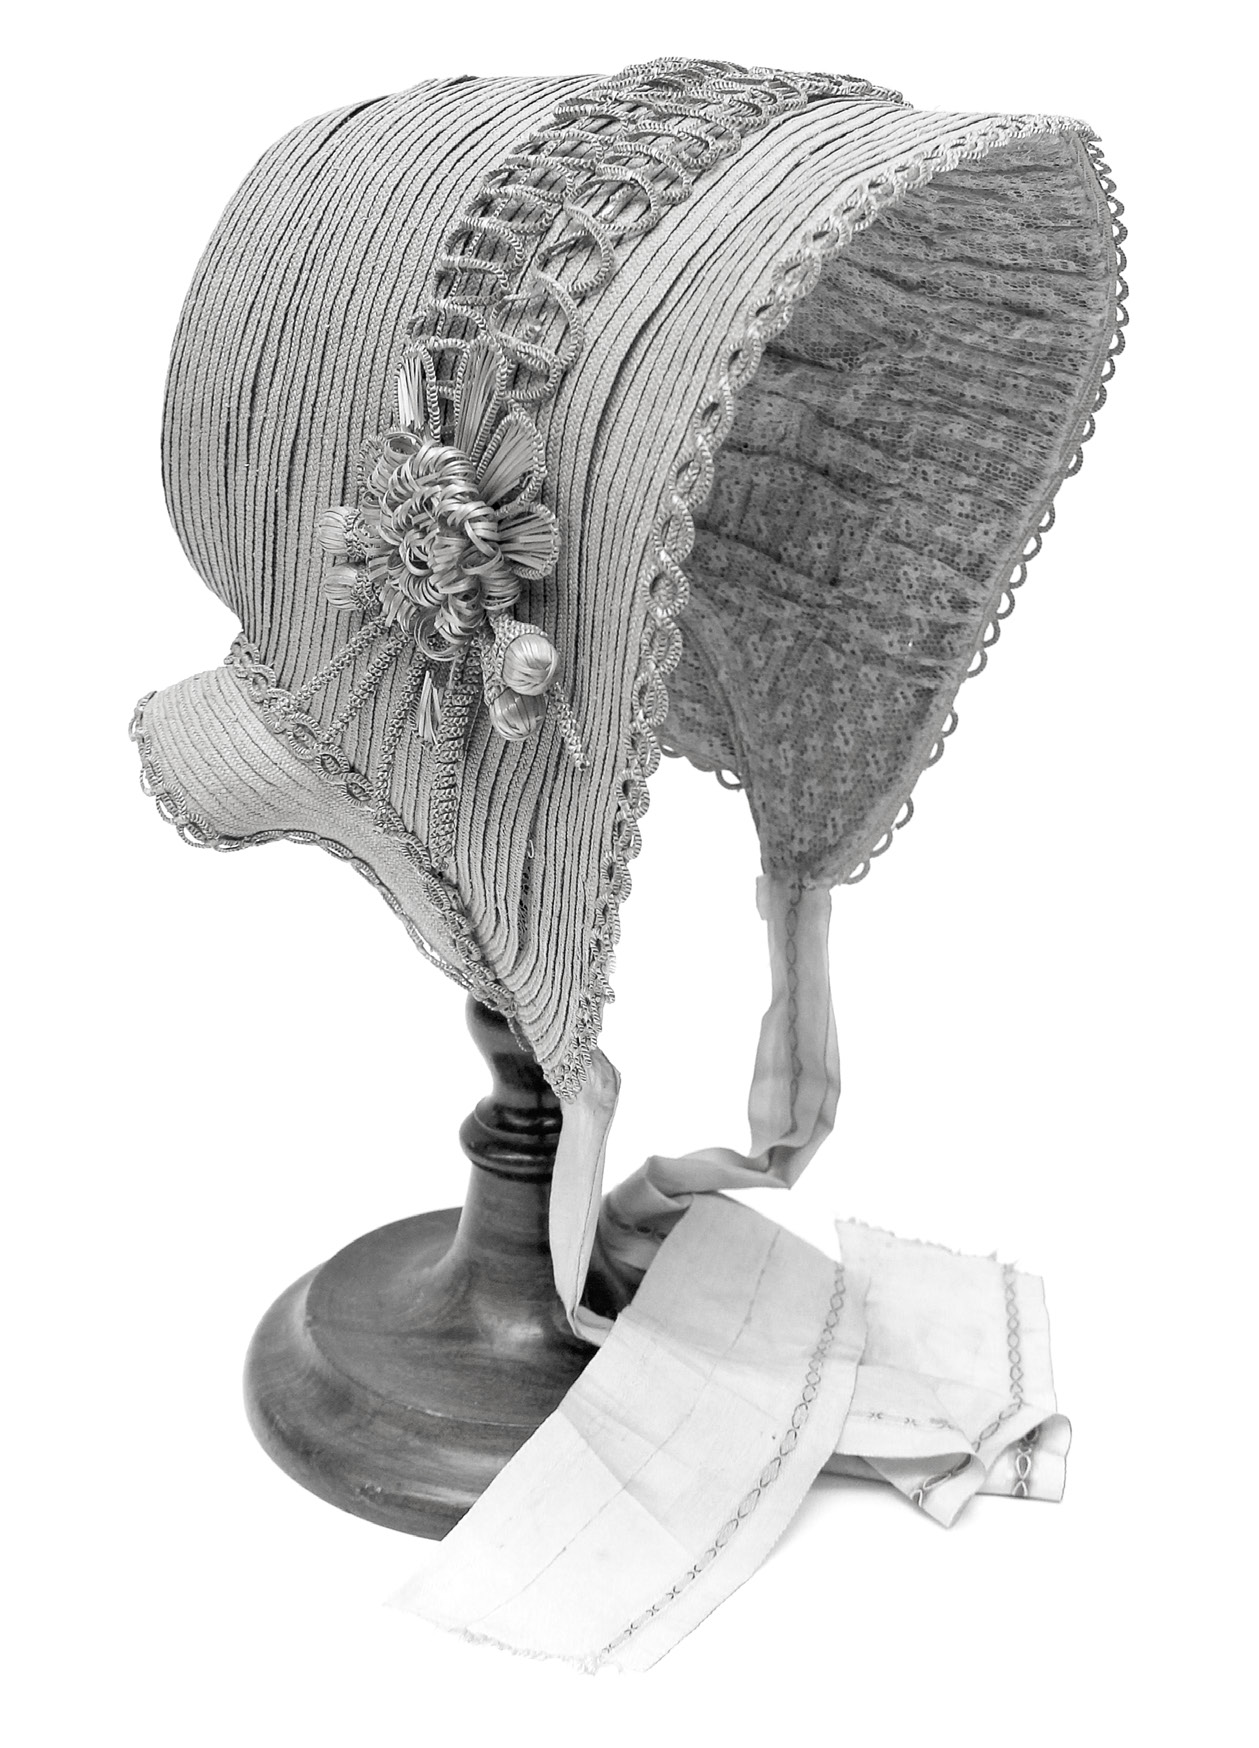 A ladies linen poke bonnet. The poke bonnet had a section behind the head, into which ladies could “poke,” or tuck their hair. This Dunstable-style hat typically featured a small crown with a wide and rounded front brim. The bonnet features narrow straw-braided trim across the top and around the edges with an extravagant straw flower. It belonged to Sarah Heller Conrad Bunnell. International Society Daughters of Utah Pioneers Picture Collection.